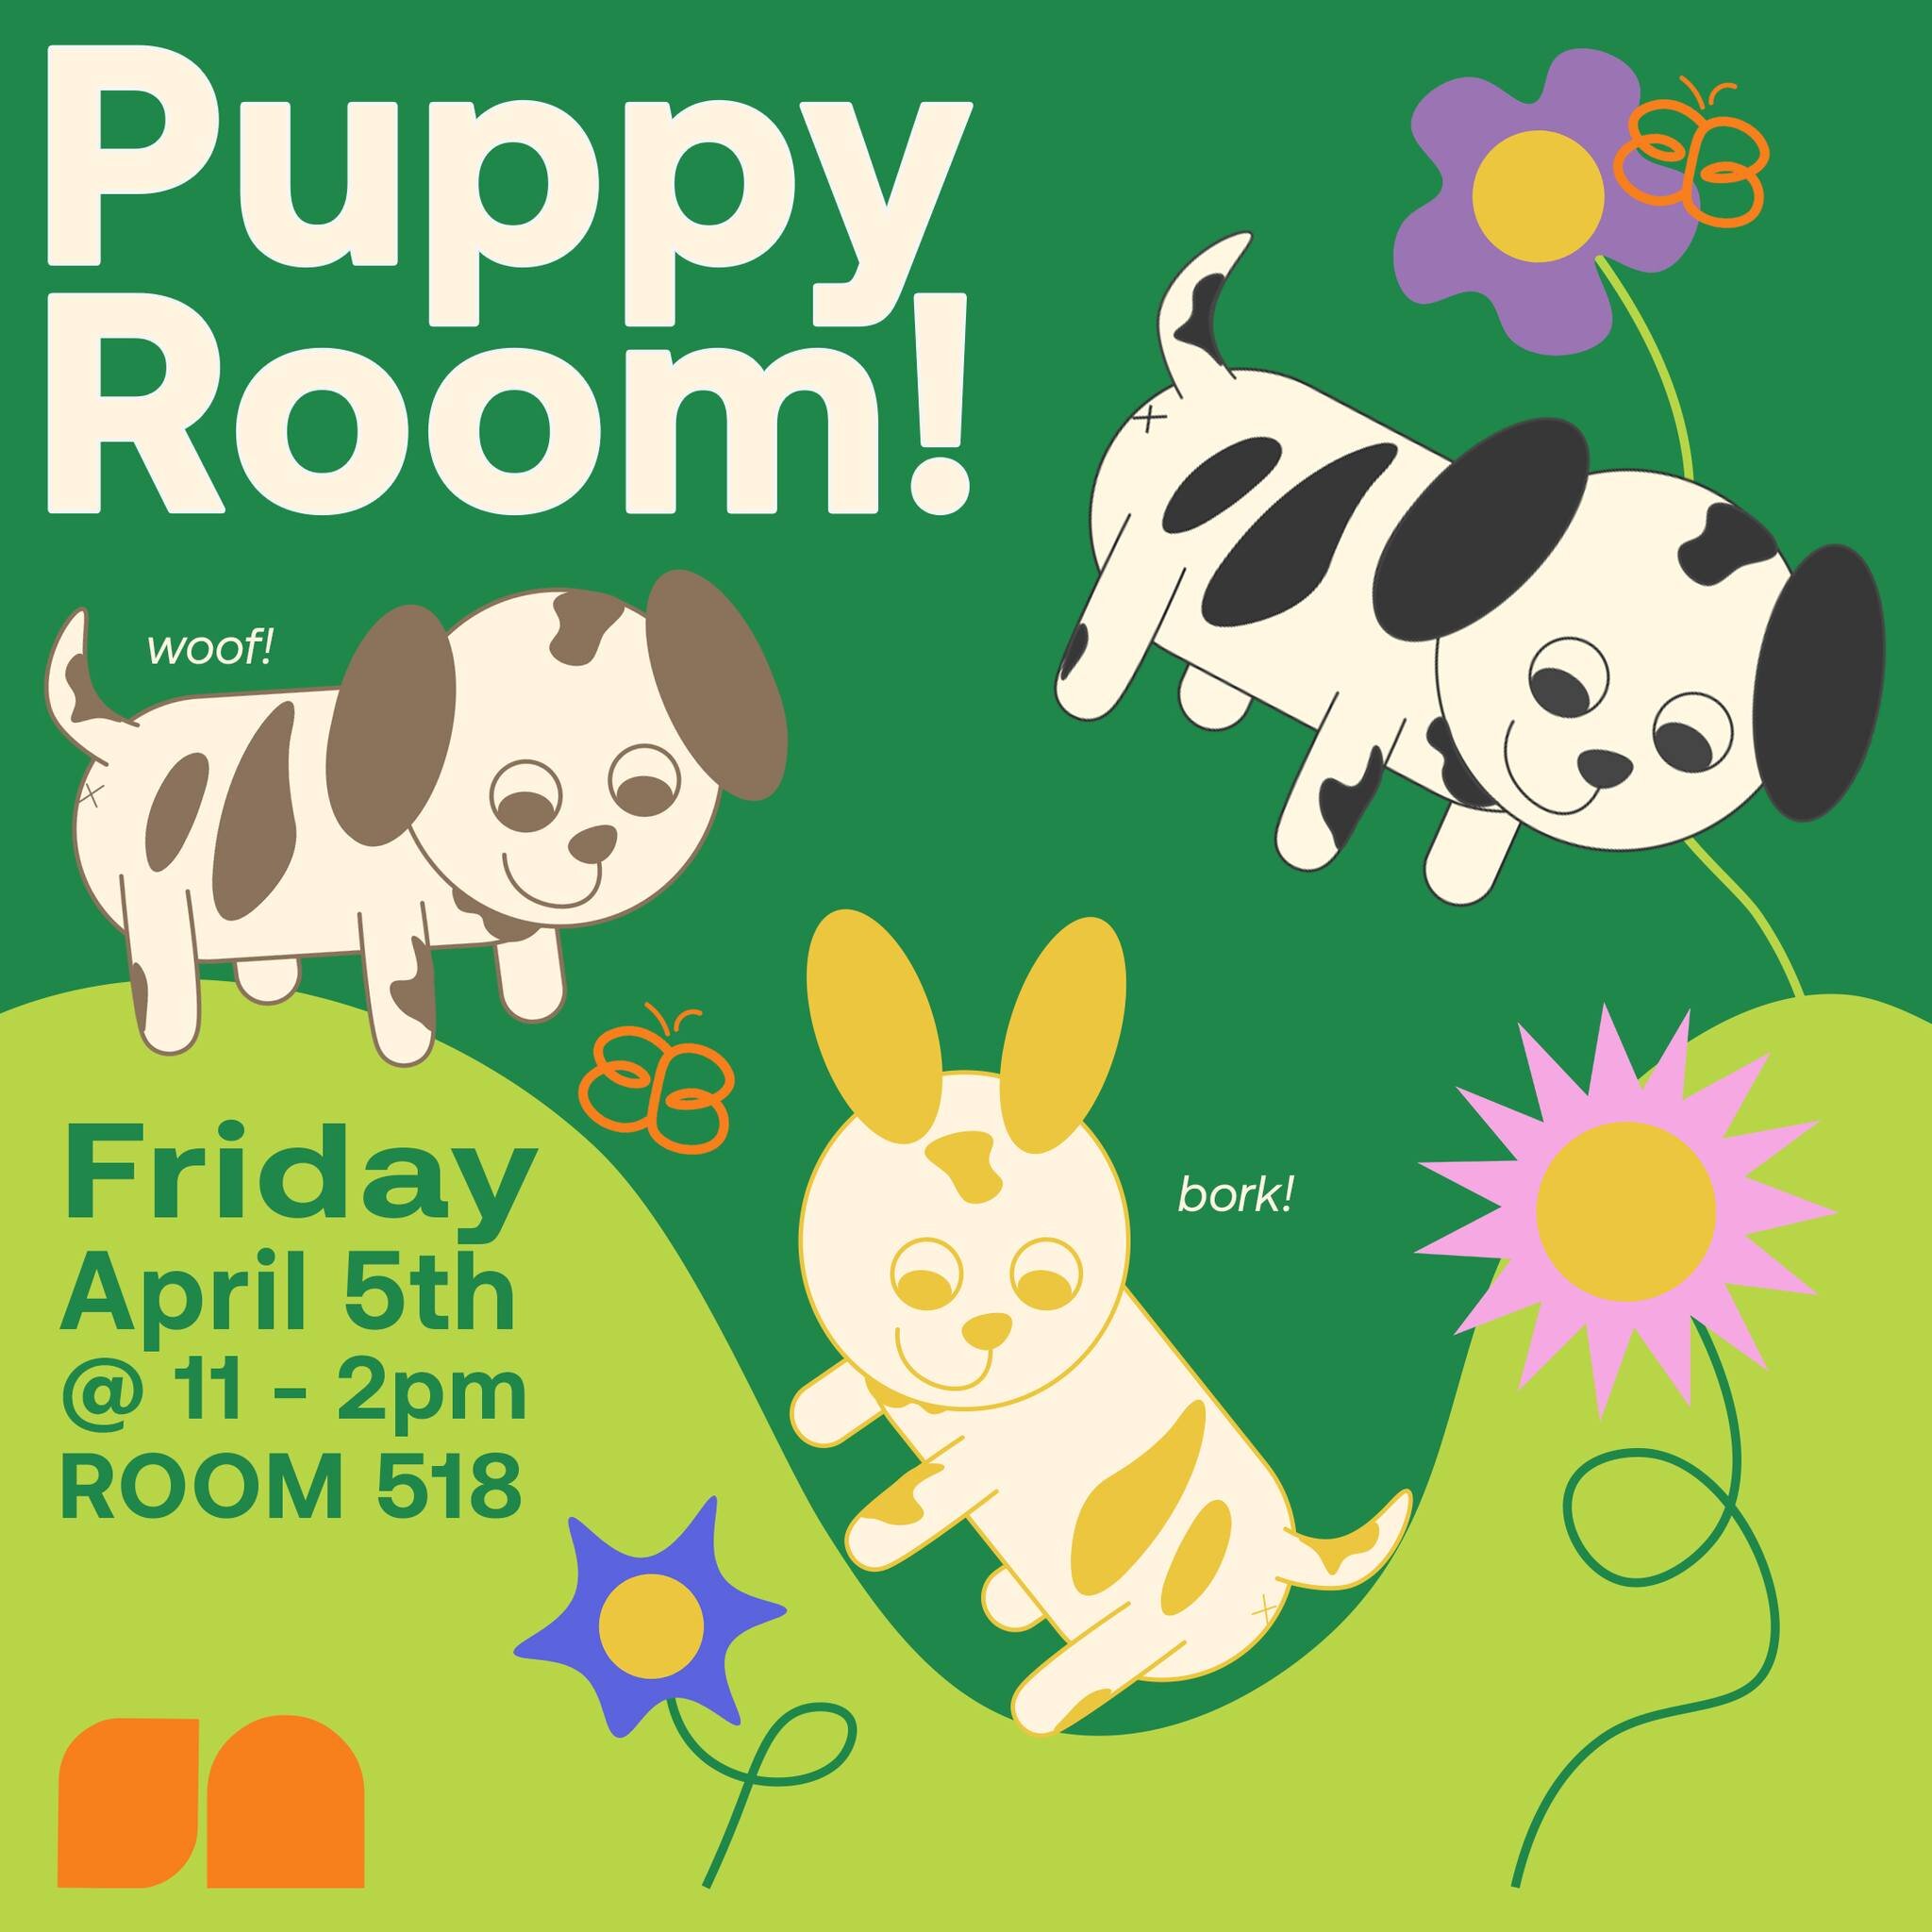 We are hosting our Puppy Room in partnership with the St. John Ambulance Therapy Dogs! Come relieve some stress with some scritches and cuddles in room 518 on April 5th from 11-2!

#AUArtsSA #AUArts #YYC